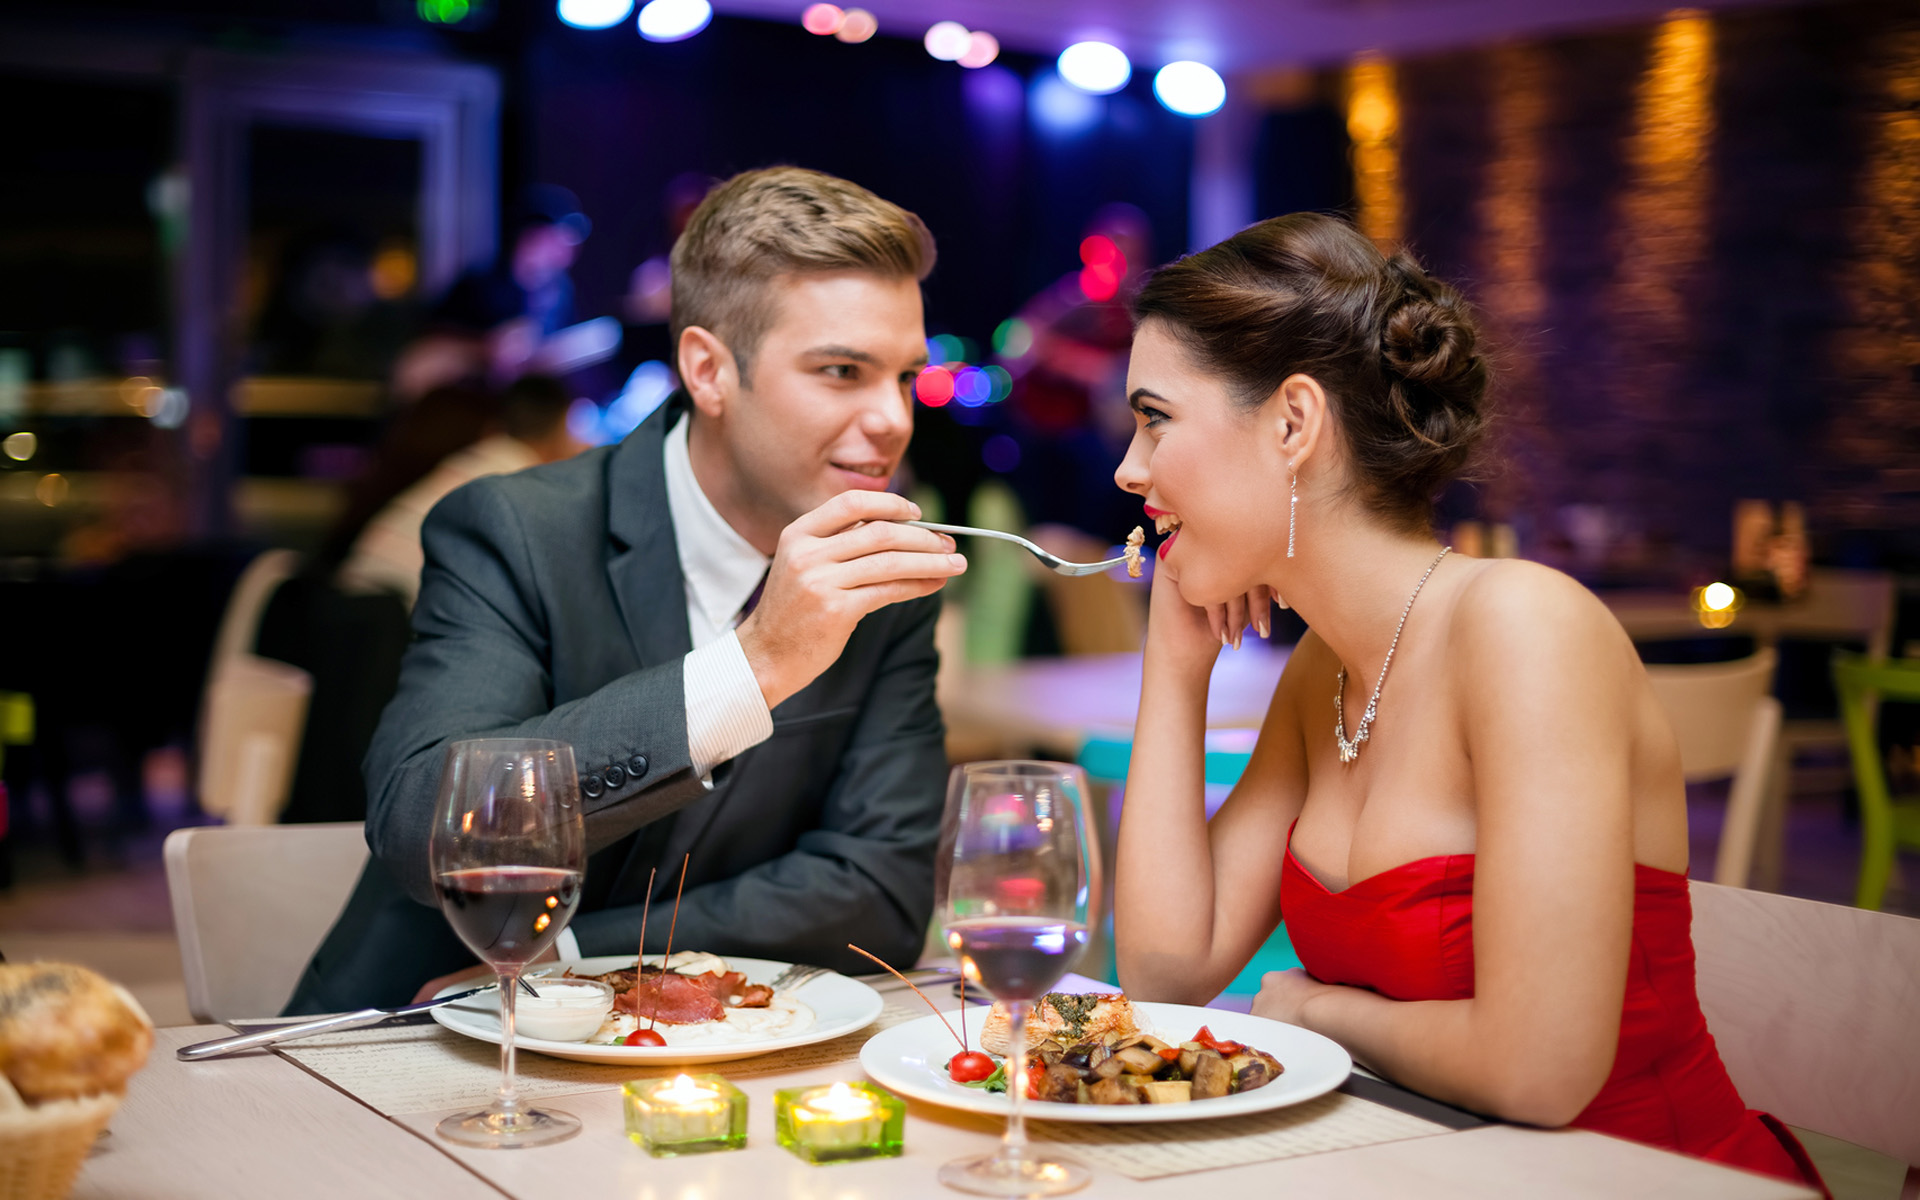 Romantic Evening With Romantic Couple in Restaurant : Wallpapers13.com